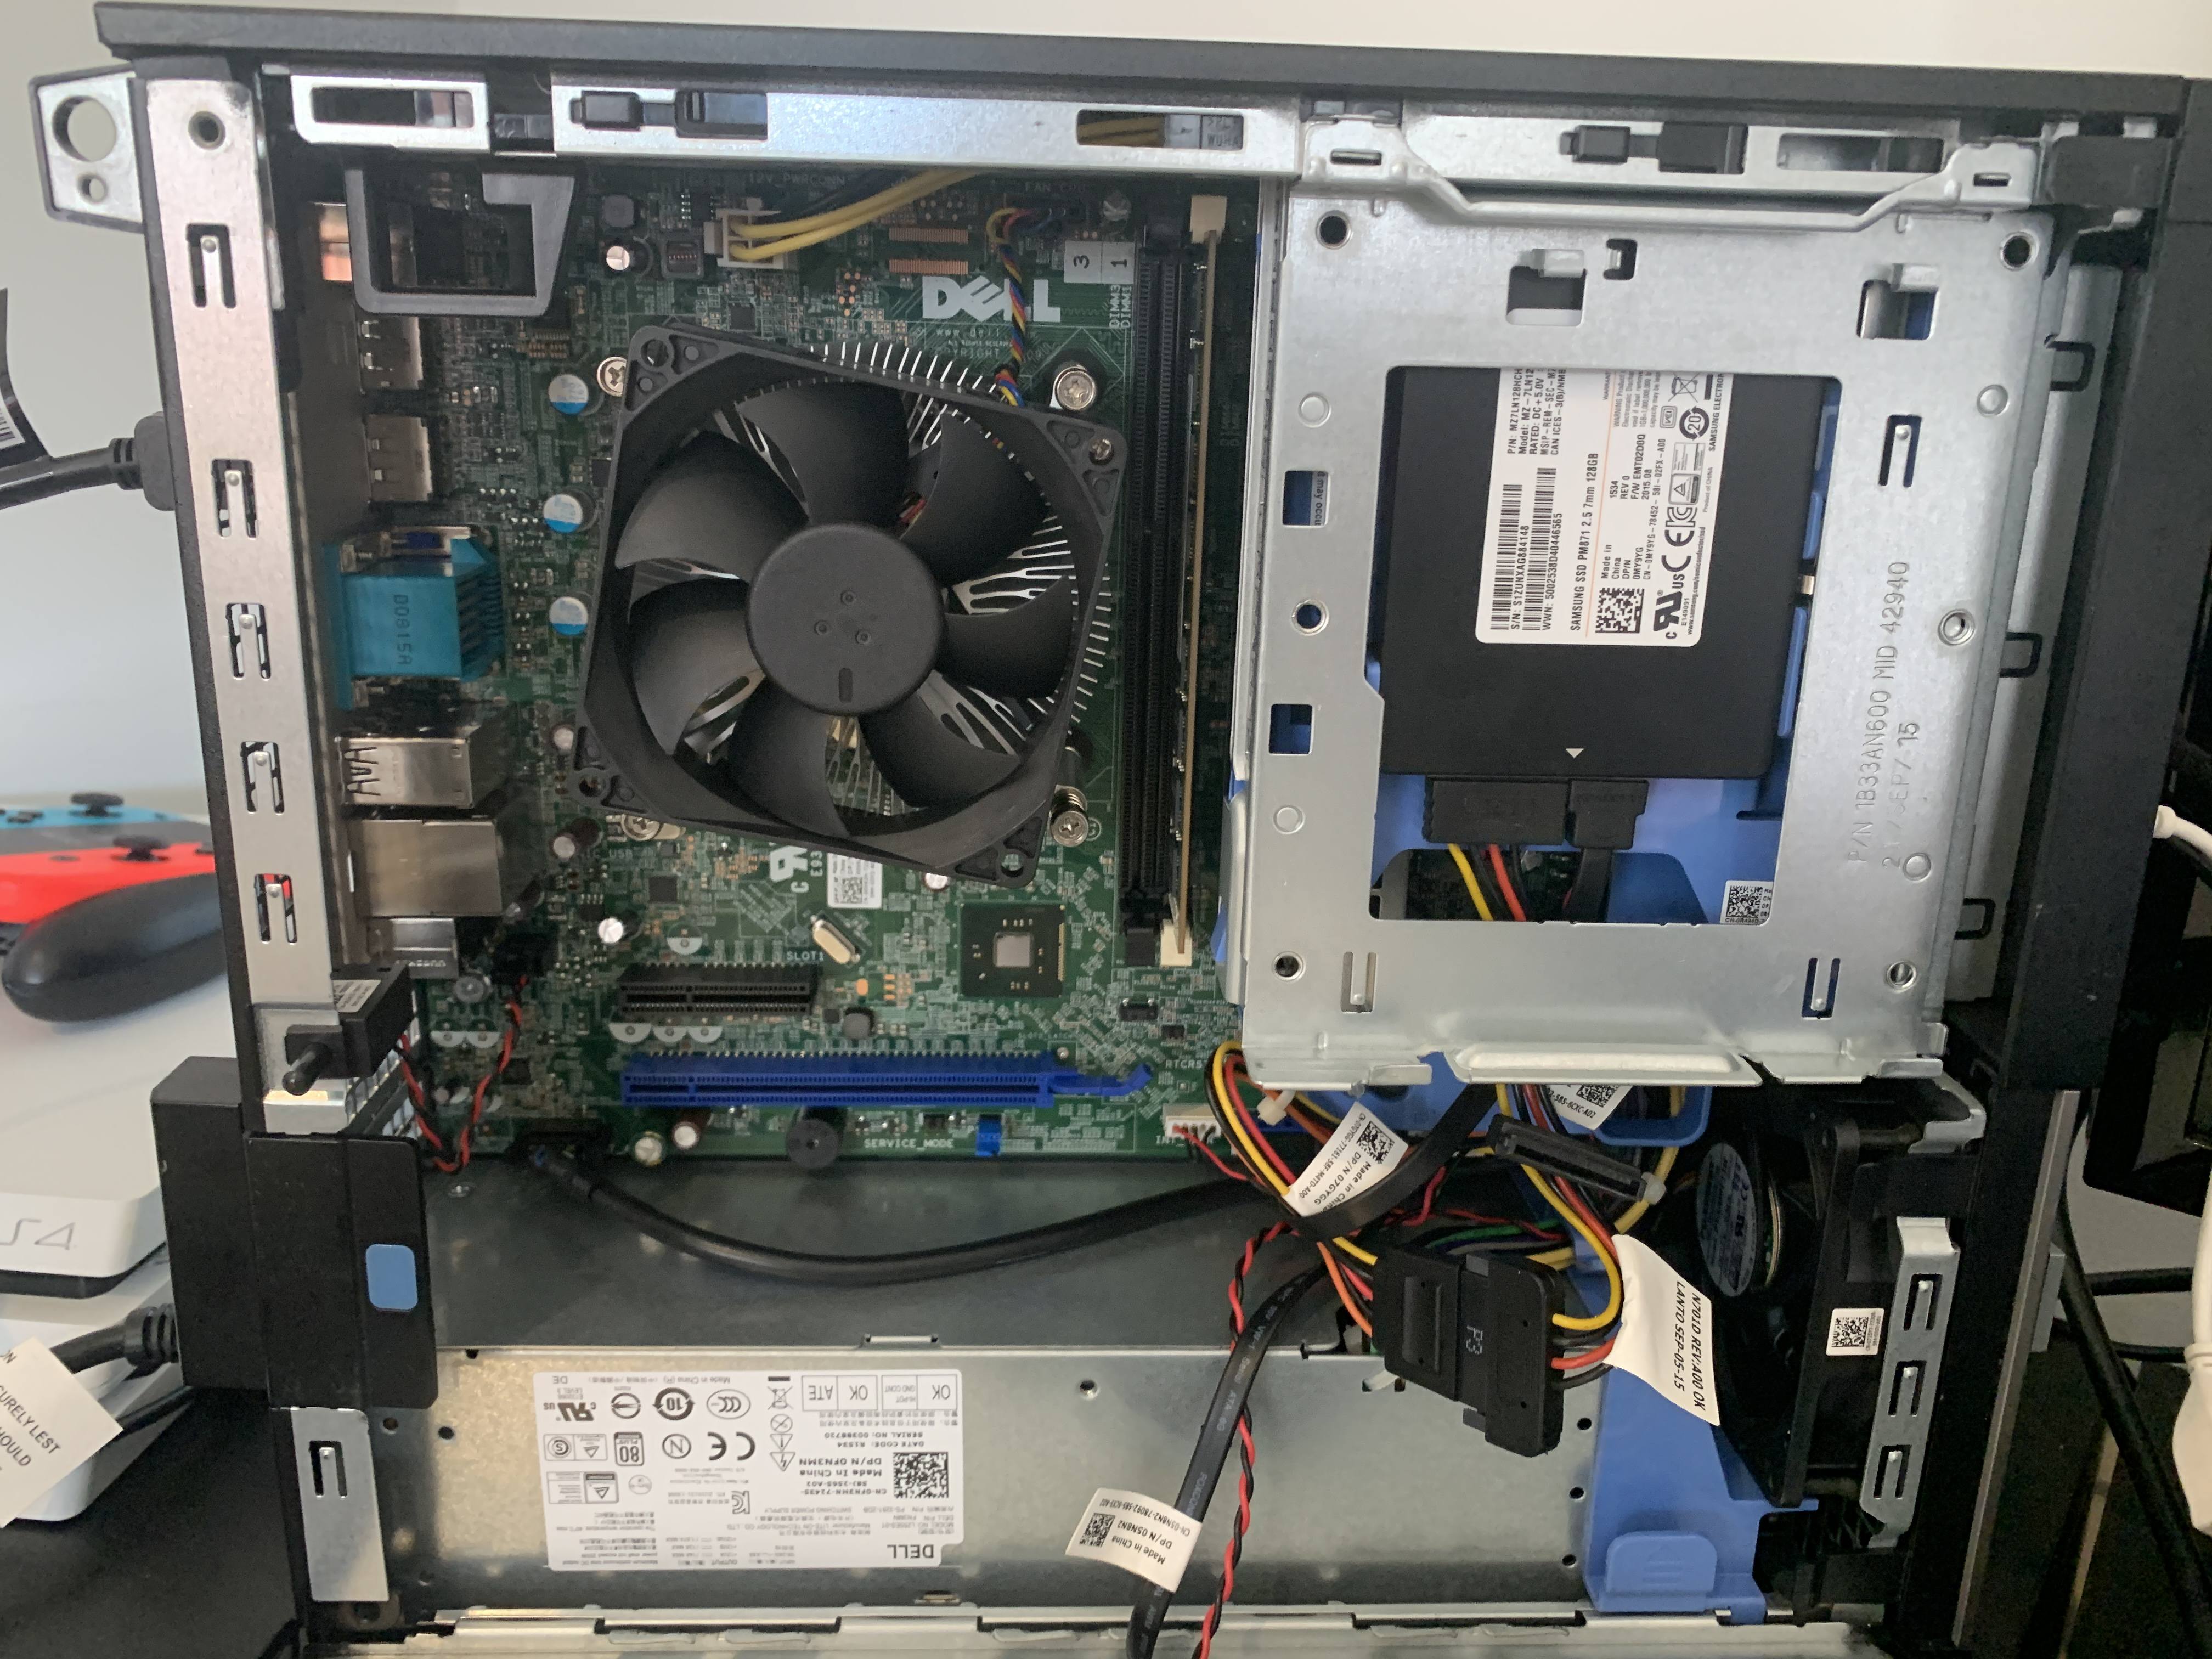 No power supply's will fit in optiplex case. - Power Supplies - Linus Tech  Tips